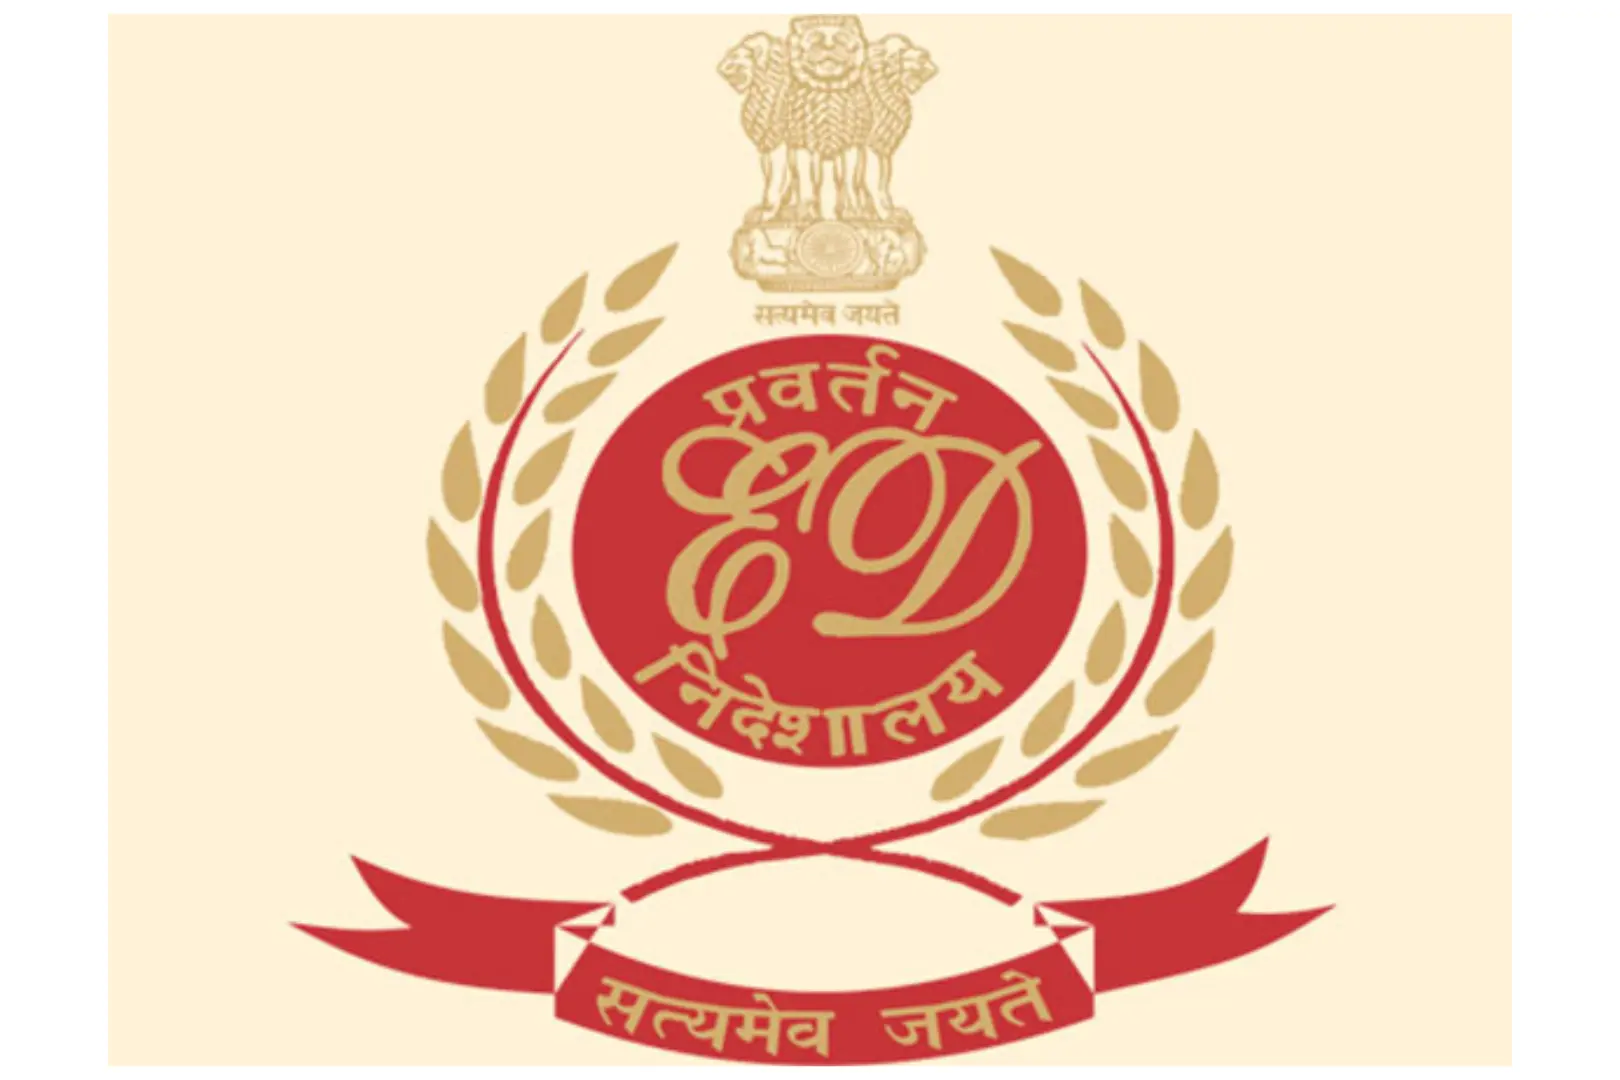 Fourth suspect in Rajasthan Jal Jeevan Mission "scam" is apprehended by ED